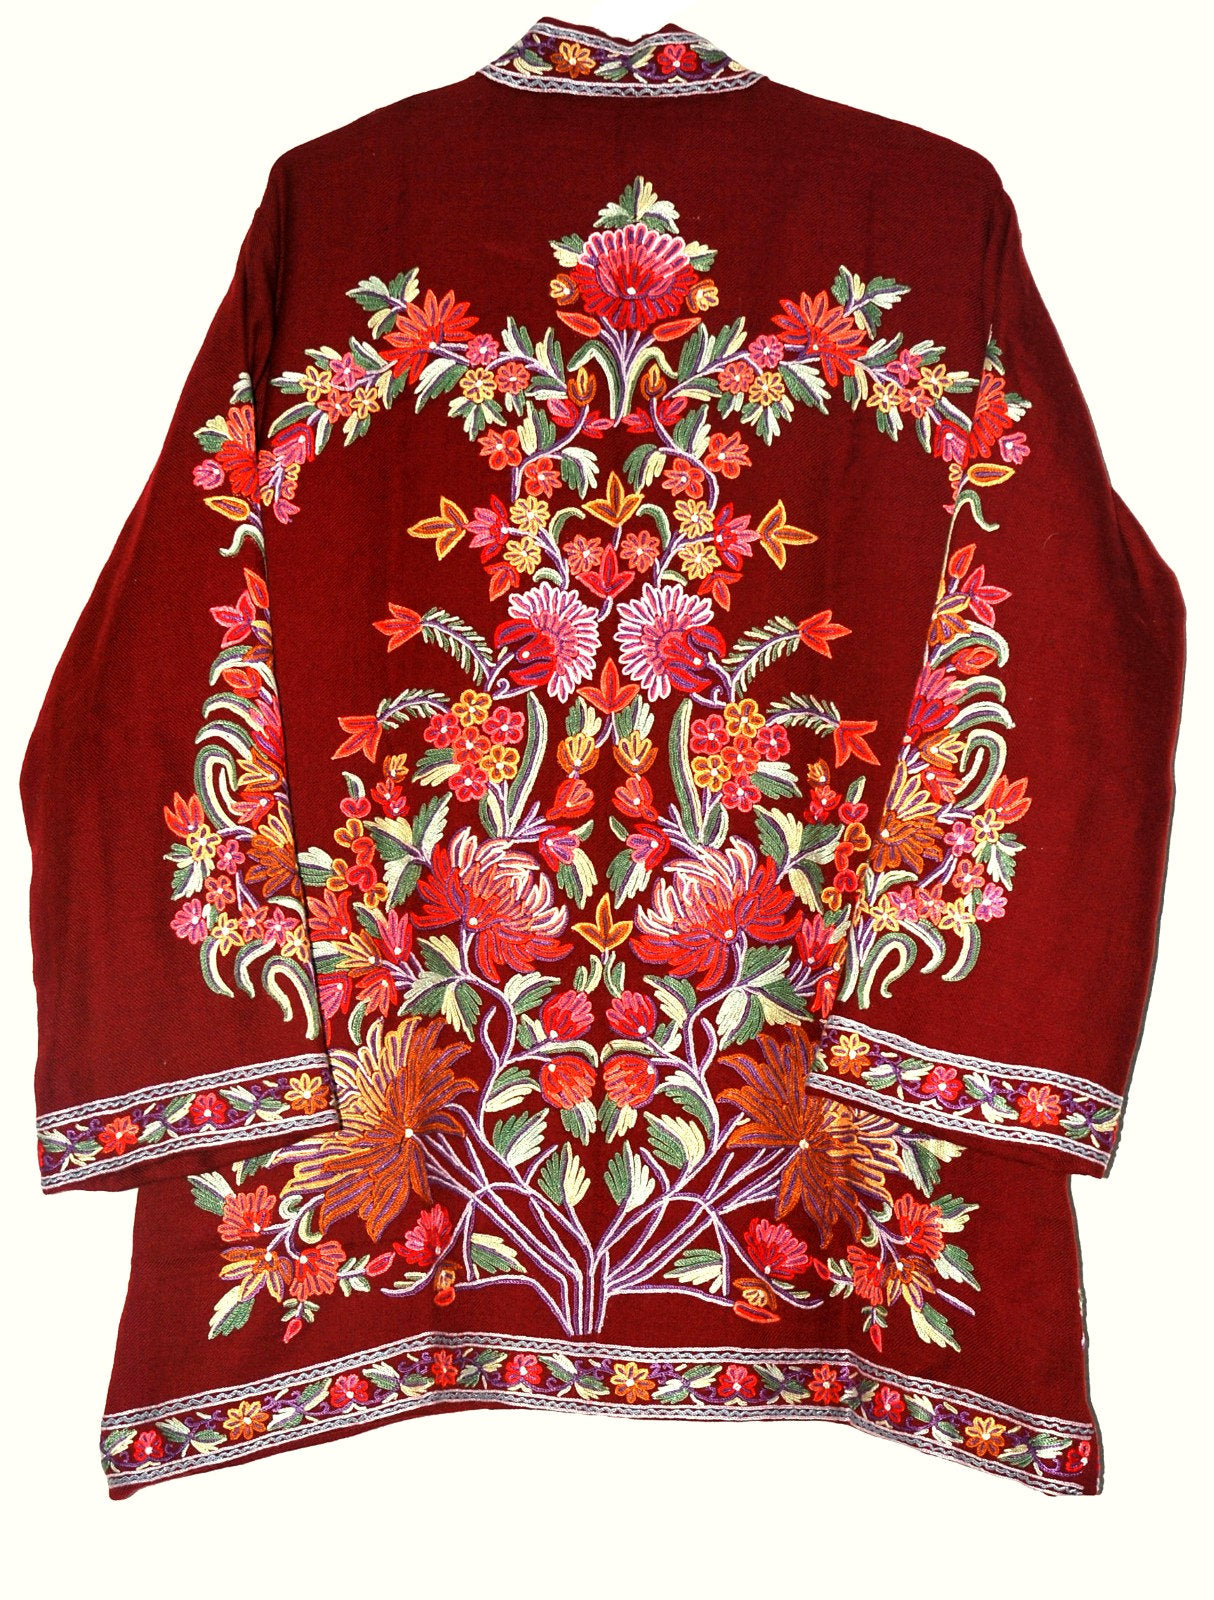 Embroidered Woolen Jacket Maroon, Multicolor Embroidery #AO-016